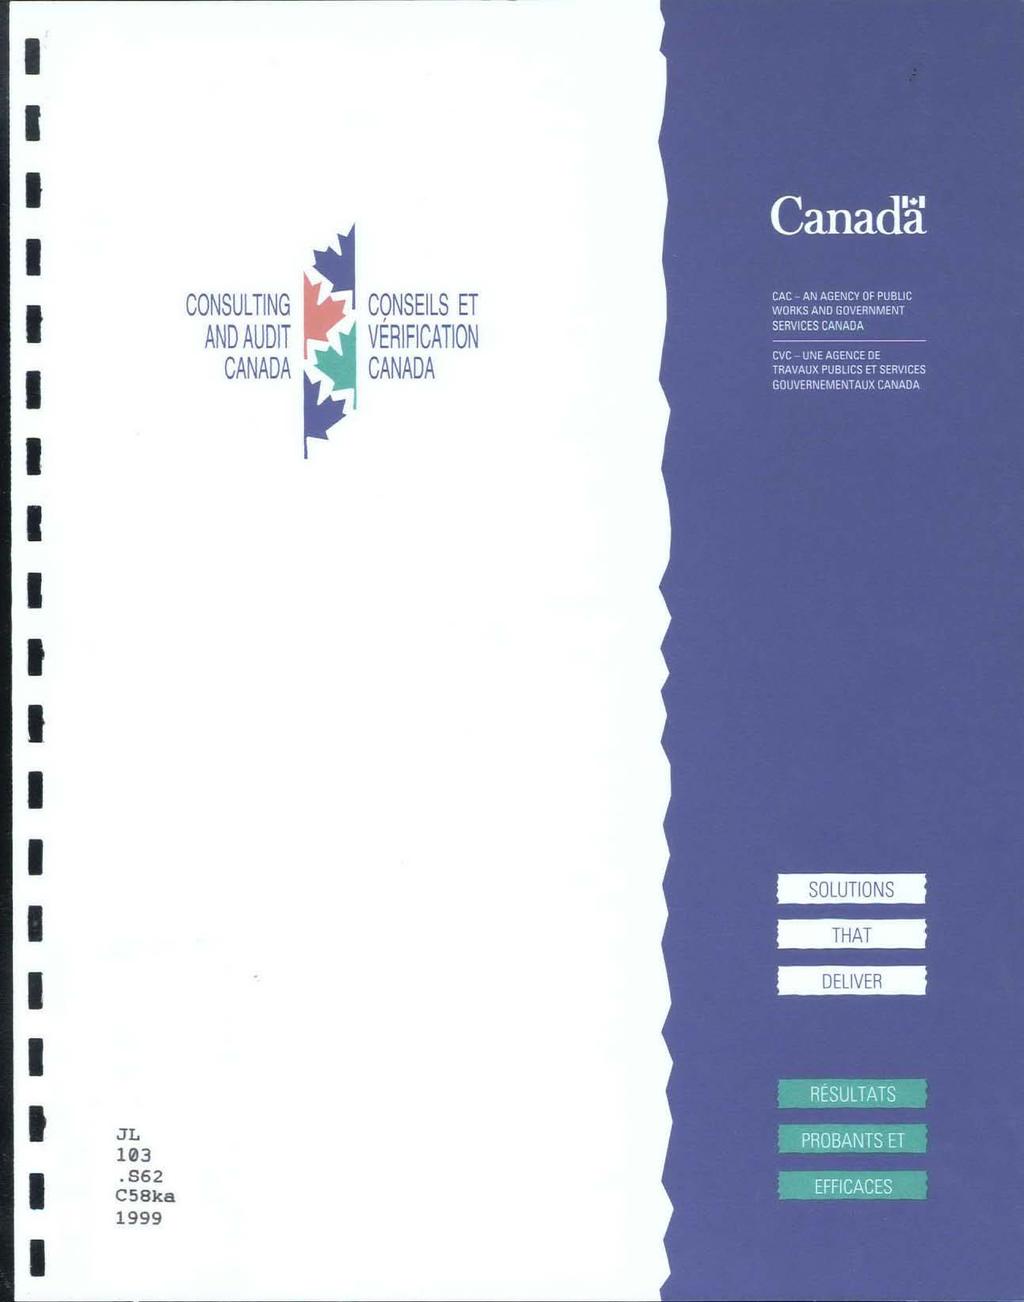 Canactl CONSULTING AND AUDIT CANADA CONSEILS ET VÉRIFICATION CANADA CAC AN AGENCY OF PUBLIC VVORKS AND GOVERNMENT SERVICES CANADA CVC -